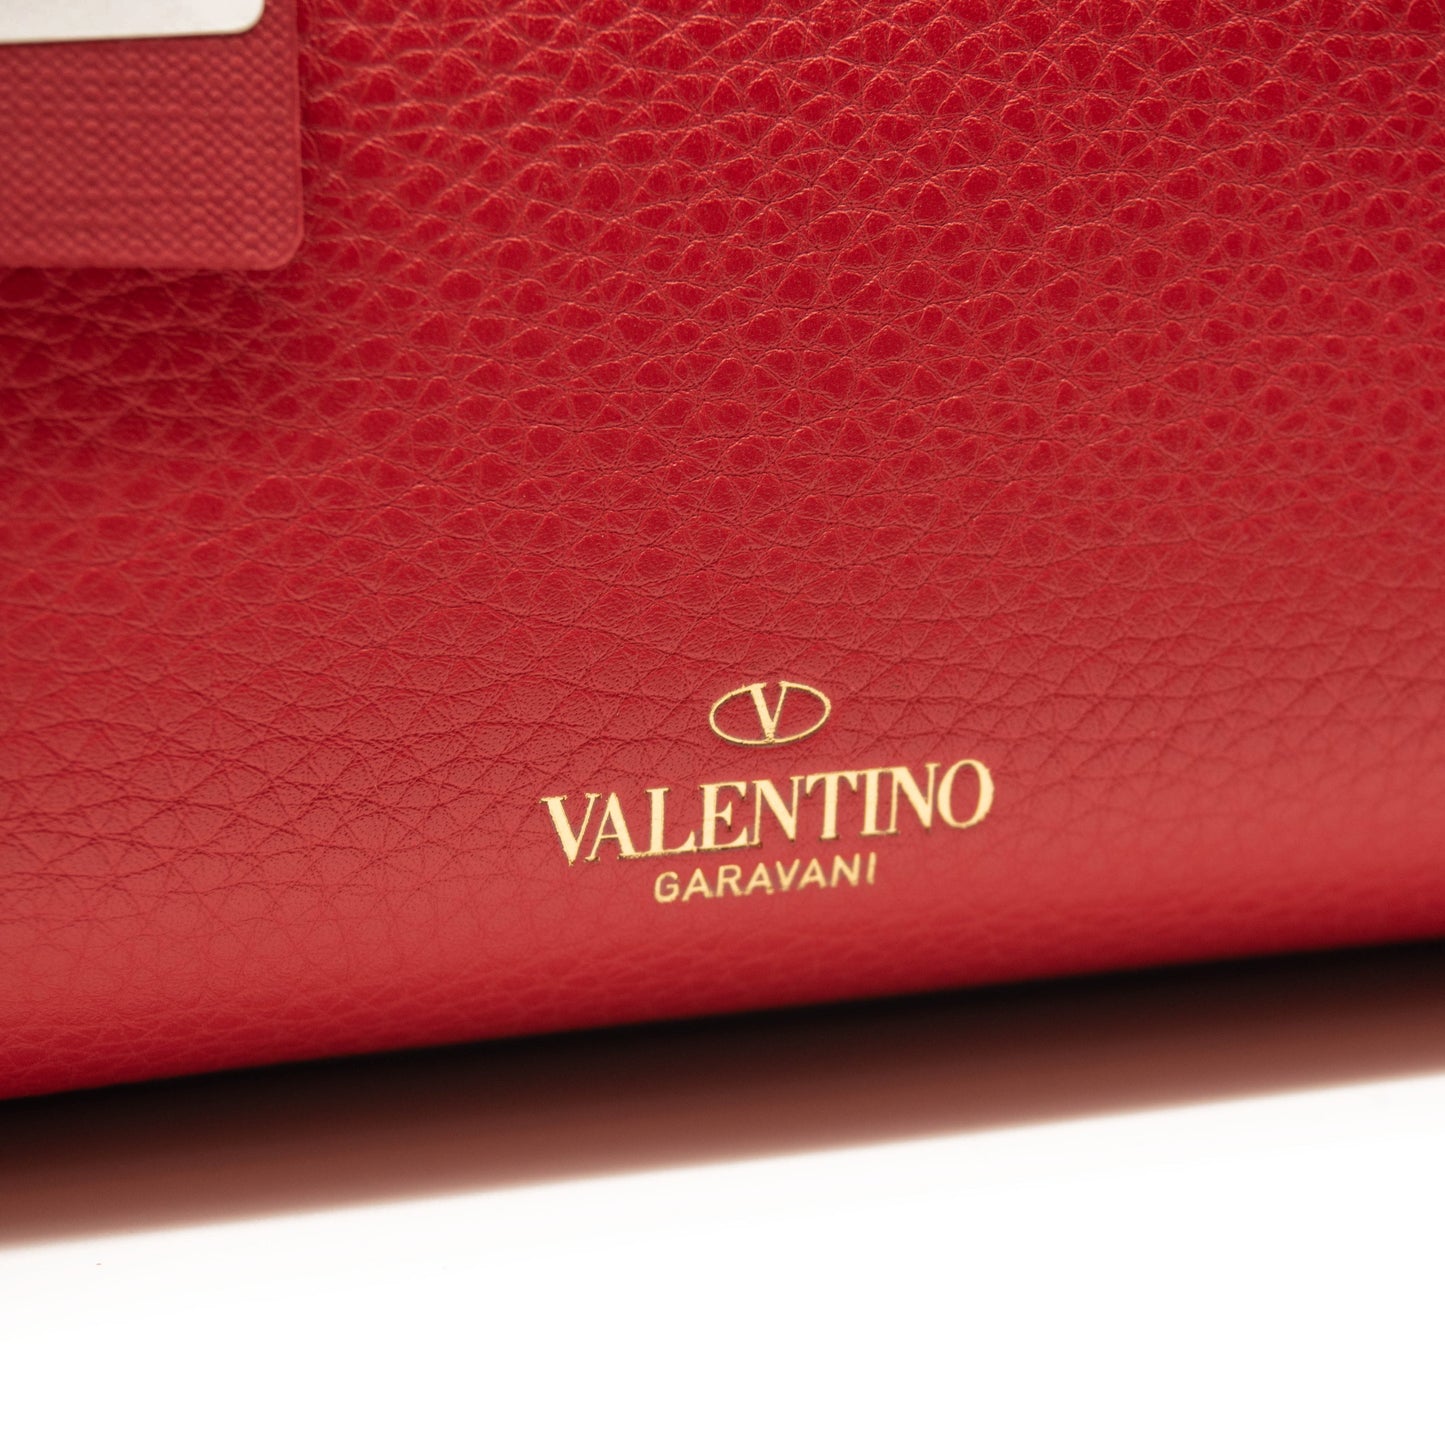 NEW Valentino Small Rockstud Leather Tote Red Studded Spike